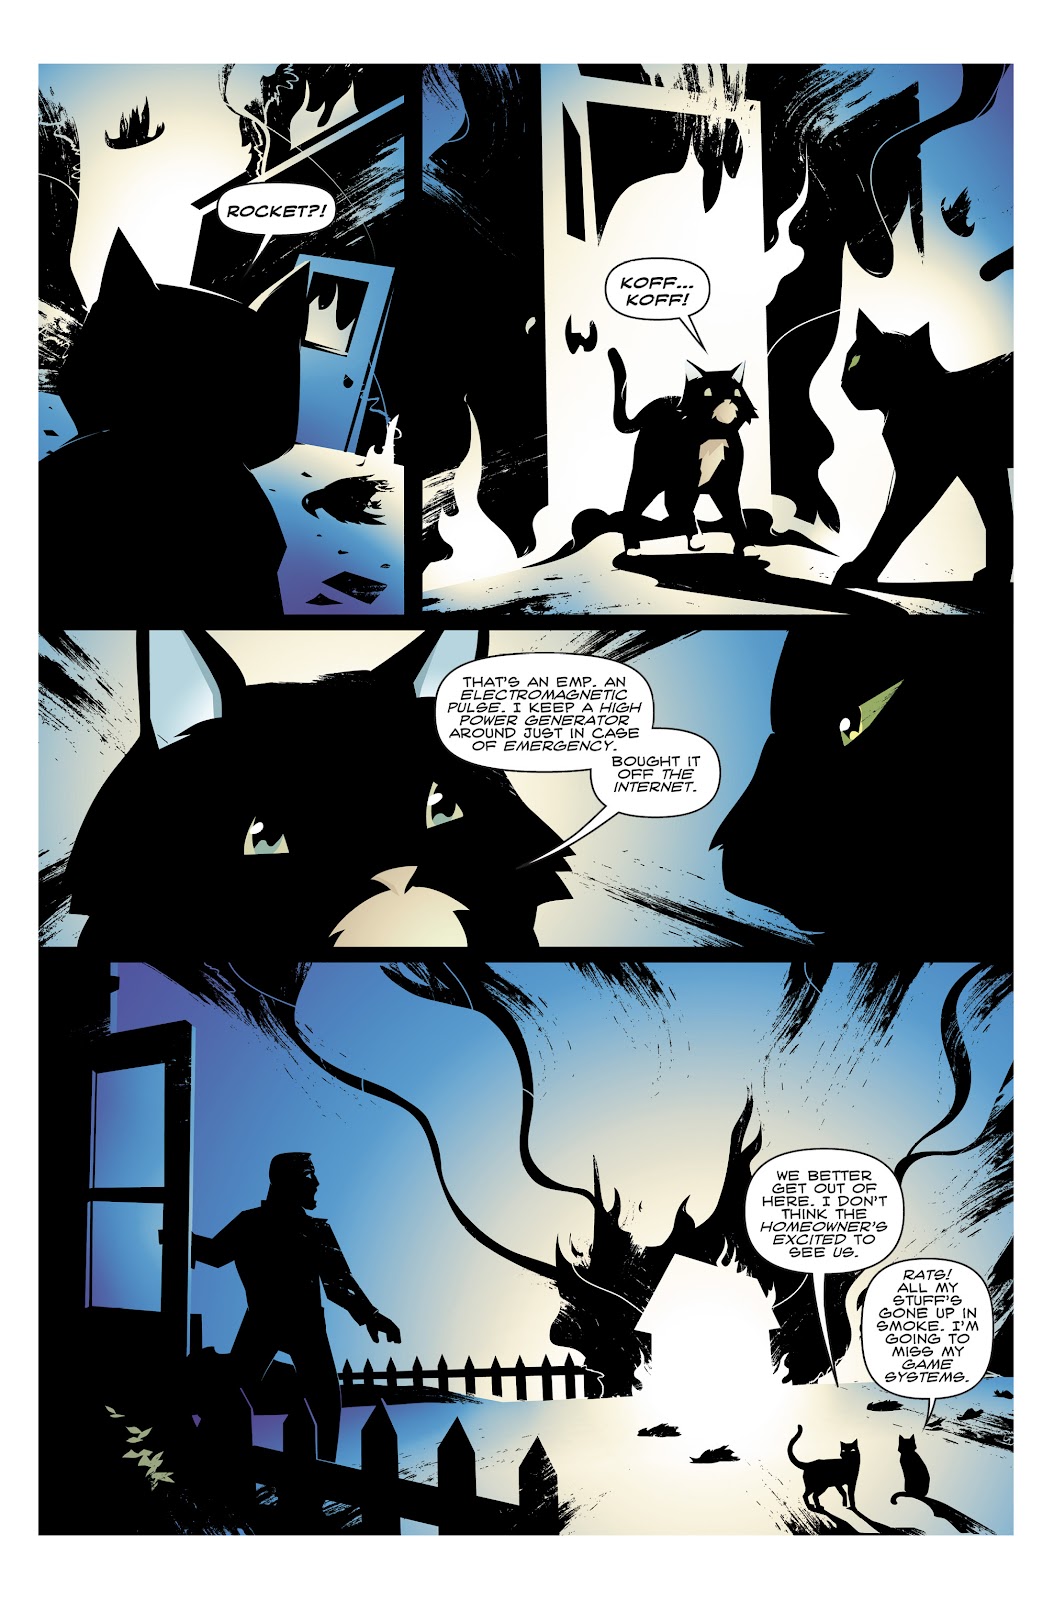 Hero Cats: Midnight Over Stellar City Vol. 2 issue 1 - Page 13